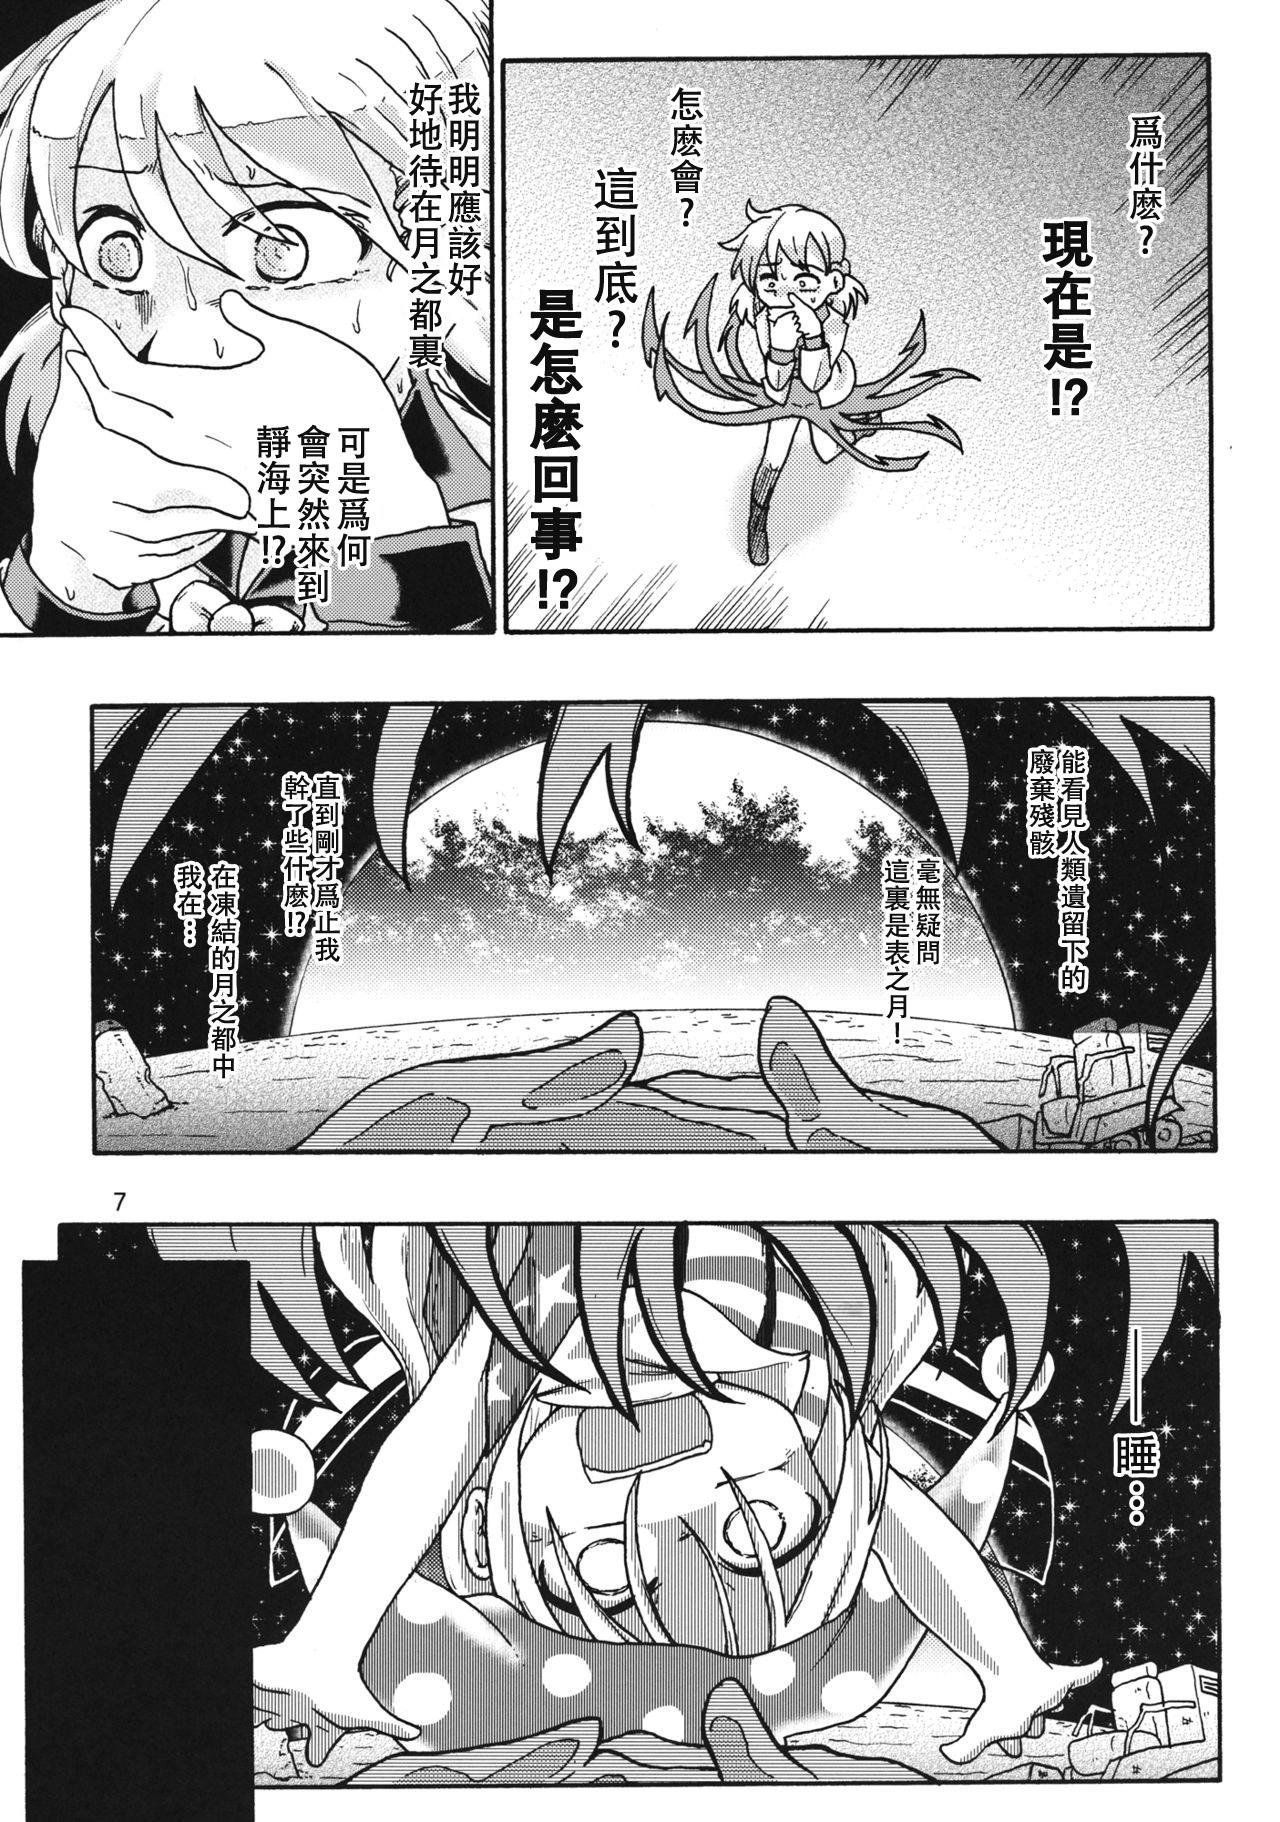 Celebrity Sex Scene Creeping! - Touhou project Gay Pawnshop - Page 6